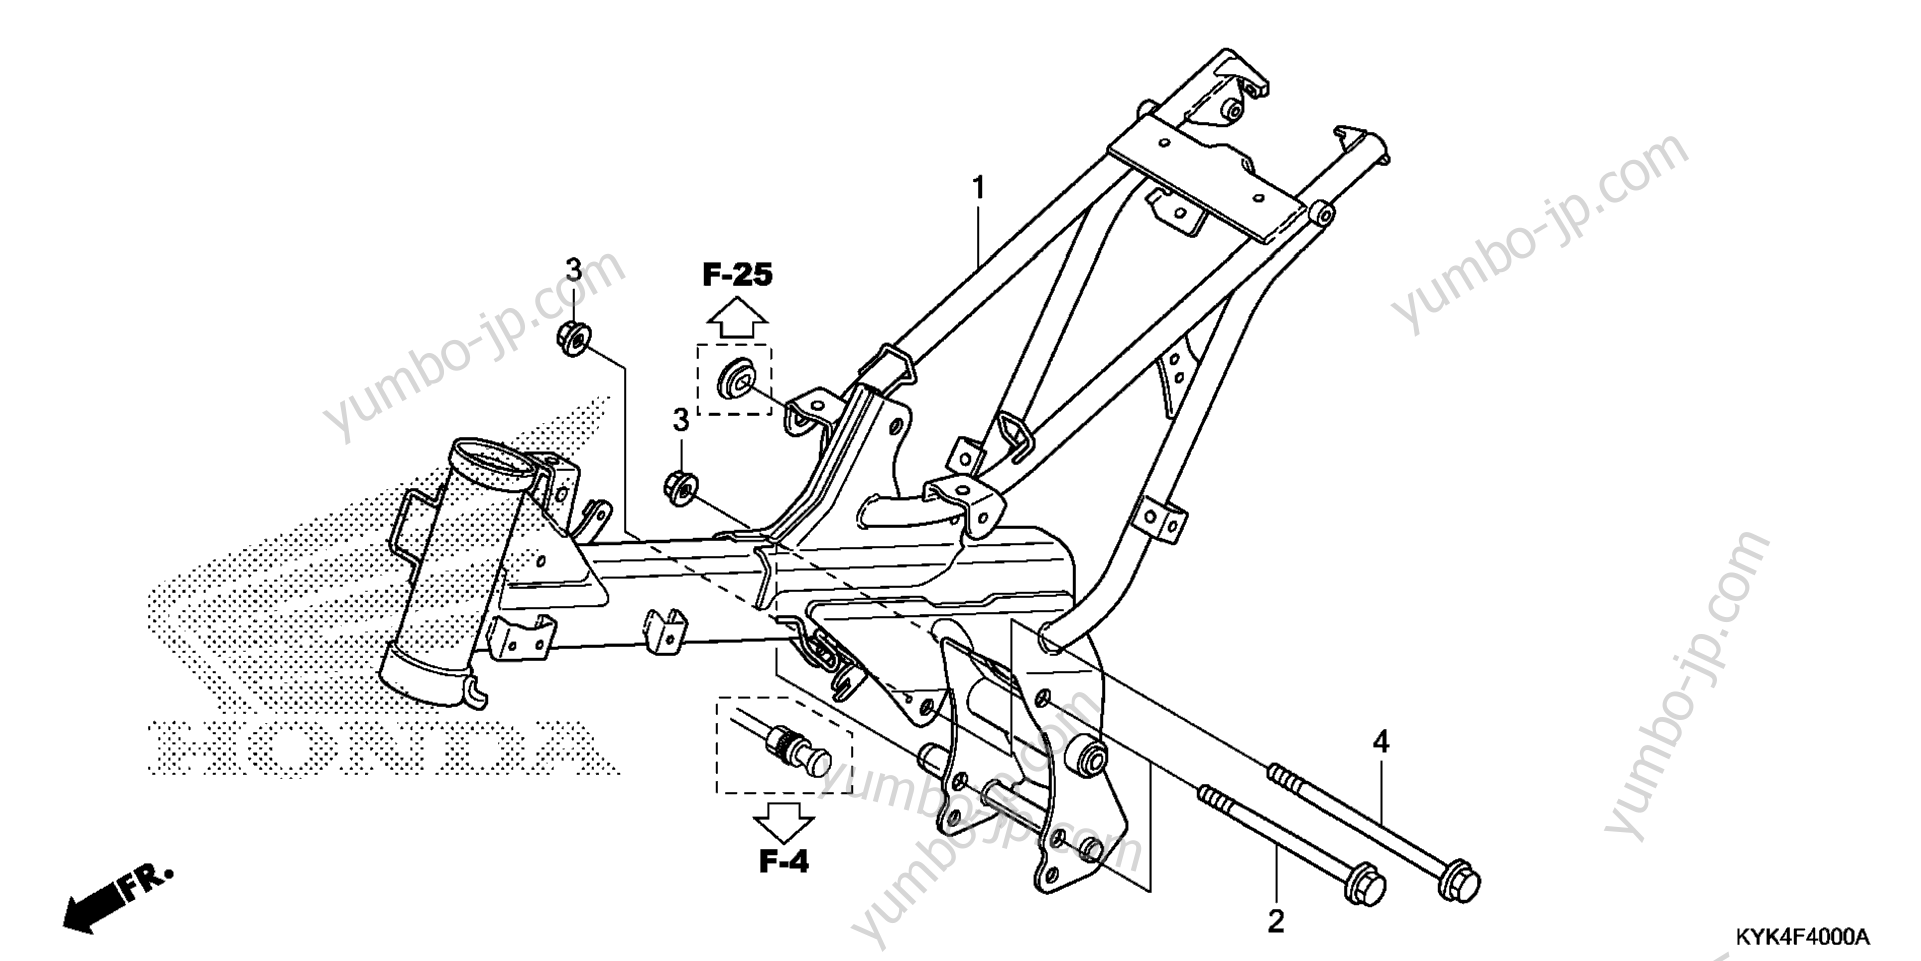 FRAME for motorcycles HONDA CRF110F AC 2013 year